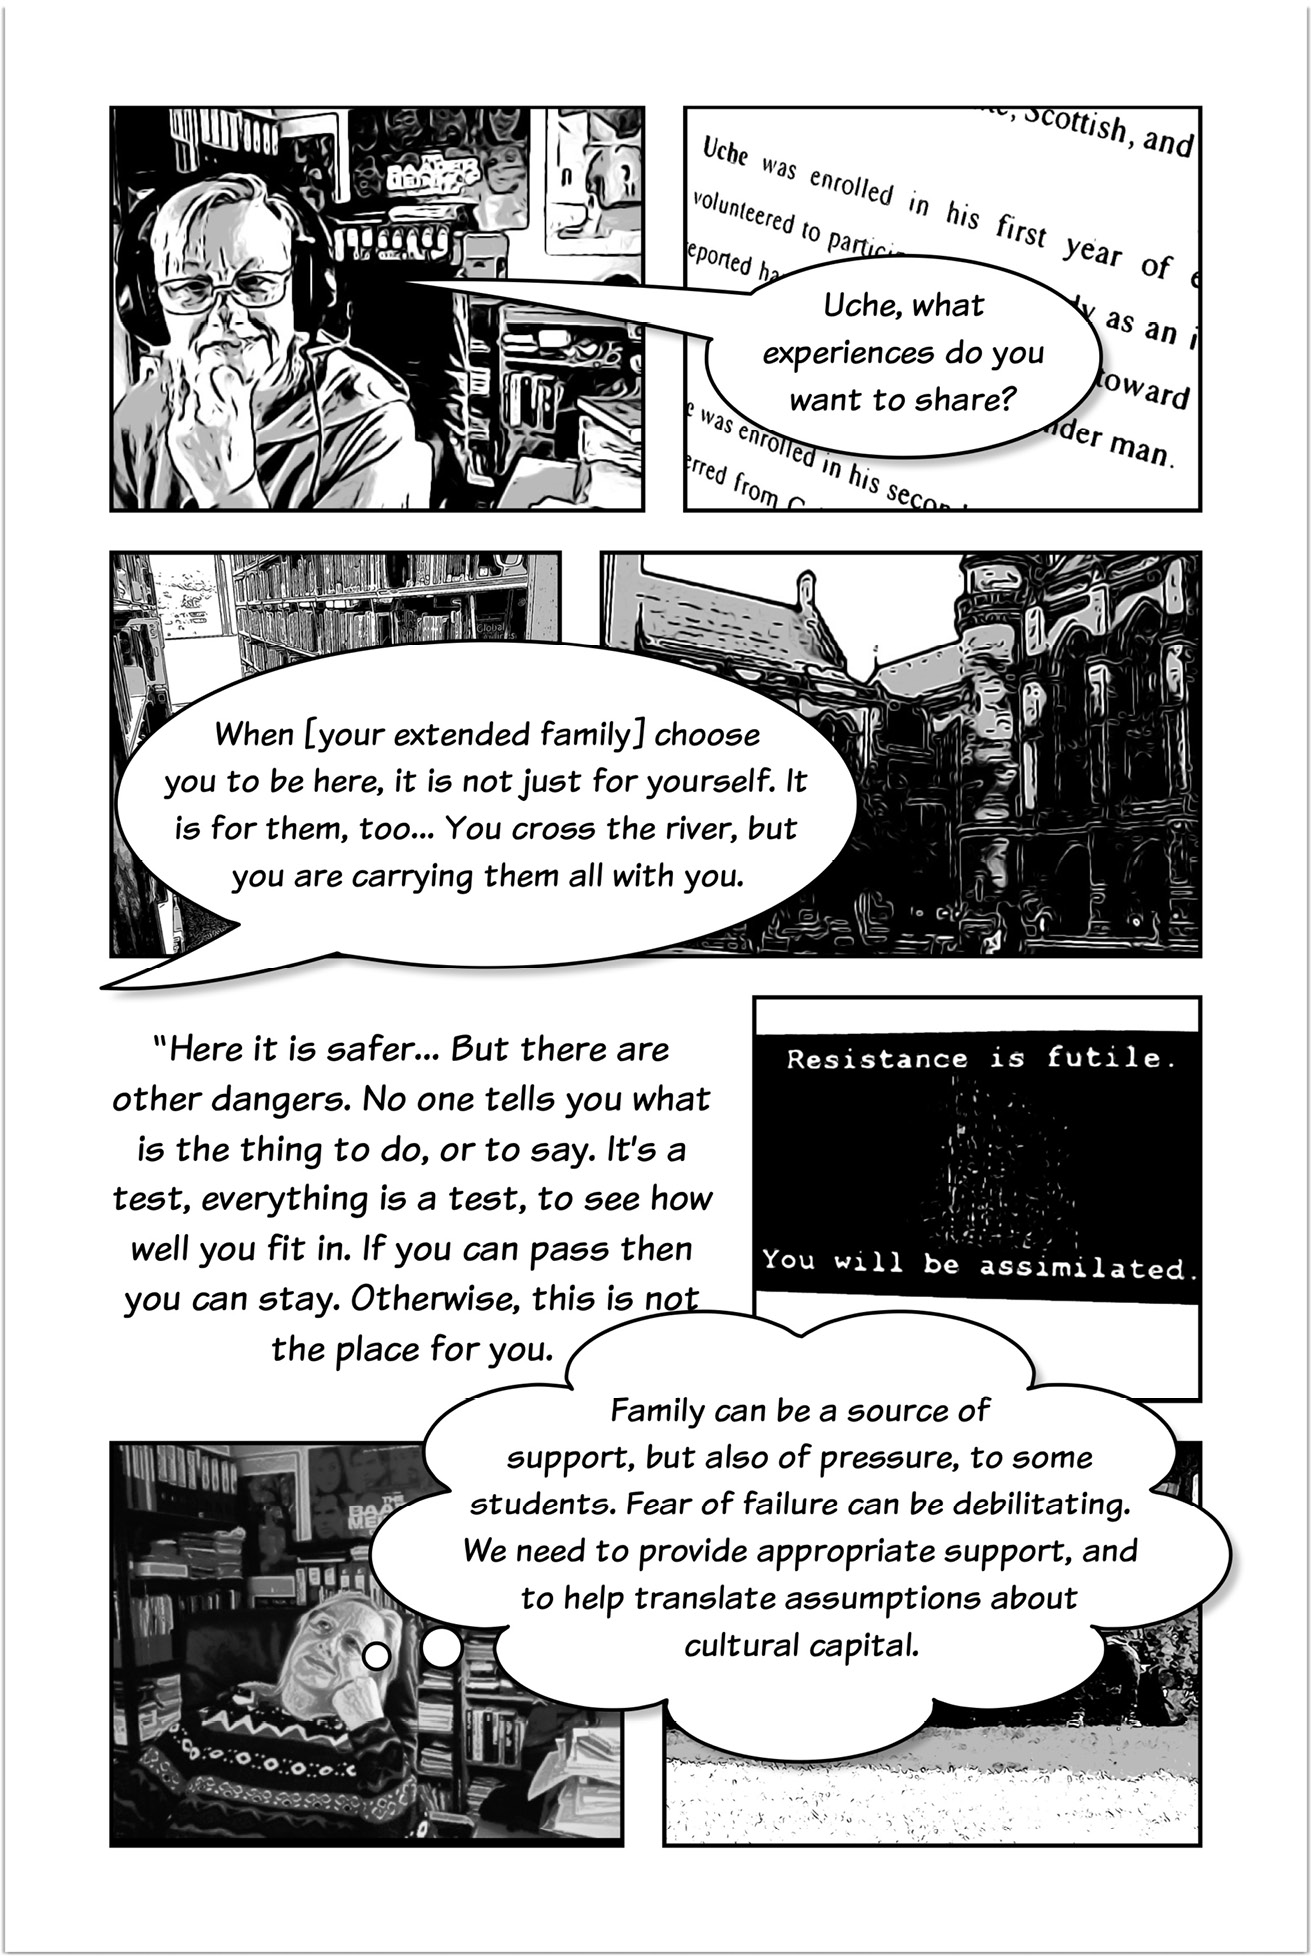 Four-panelled sequence of a comic strip, the first panel showing Trowlerís character with a speech bubble saying:  Uche, what experiences do you want to share? The next panel shows a speech bubble that answers: When your extended family choose you to be here, it is not just for yourself. It is for them, too. You cross the river, but you are carrying them all with you. Another three-panelled sequence introduced by text that reads: Here it is safer. But there are other dangers. No one tells you what is the thing to do, or to say. Itís a test, everything is a test, to see how well you fit in. If you can pass then you can stay. Otherwise, this is not the place for you. The next panel displays a text that reads: Resistance is futile. You will be assimilated. The following panel shows Trowlerís character with a thought bubble that reads: Family can be a source of support, but also of pressure, to some students. Fear of failure can be debilitating. We need to provide appropriate support, and to help translate assumptions about cultural capital.   